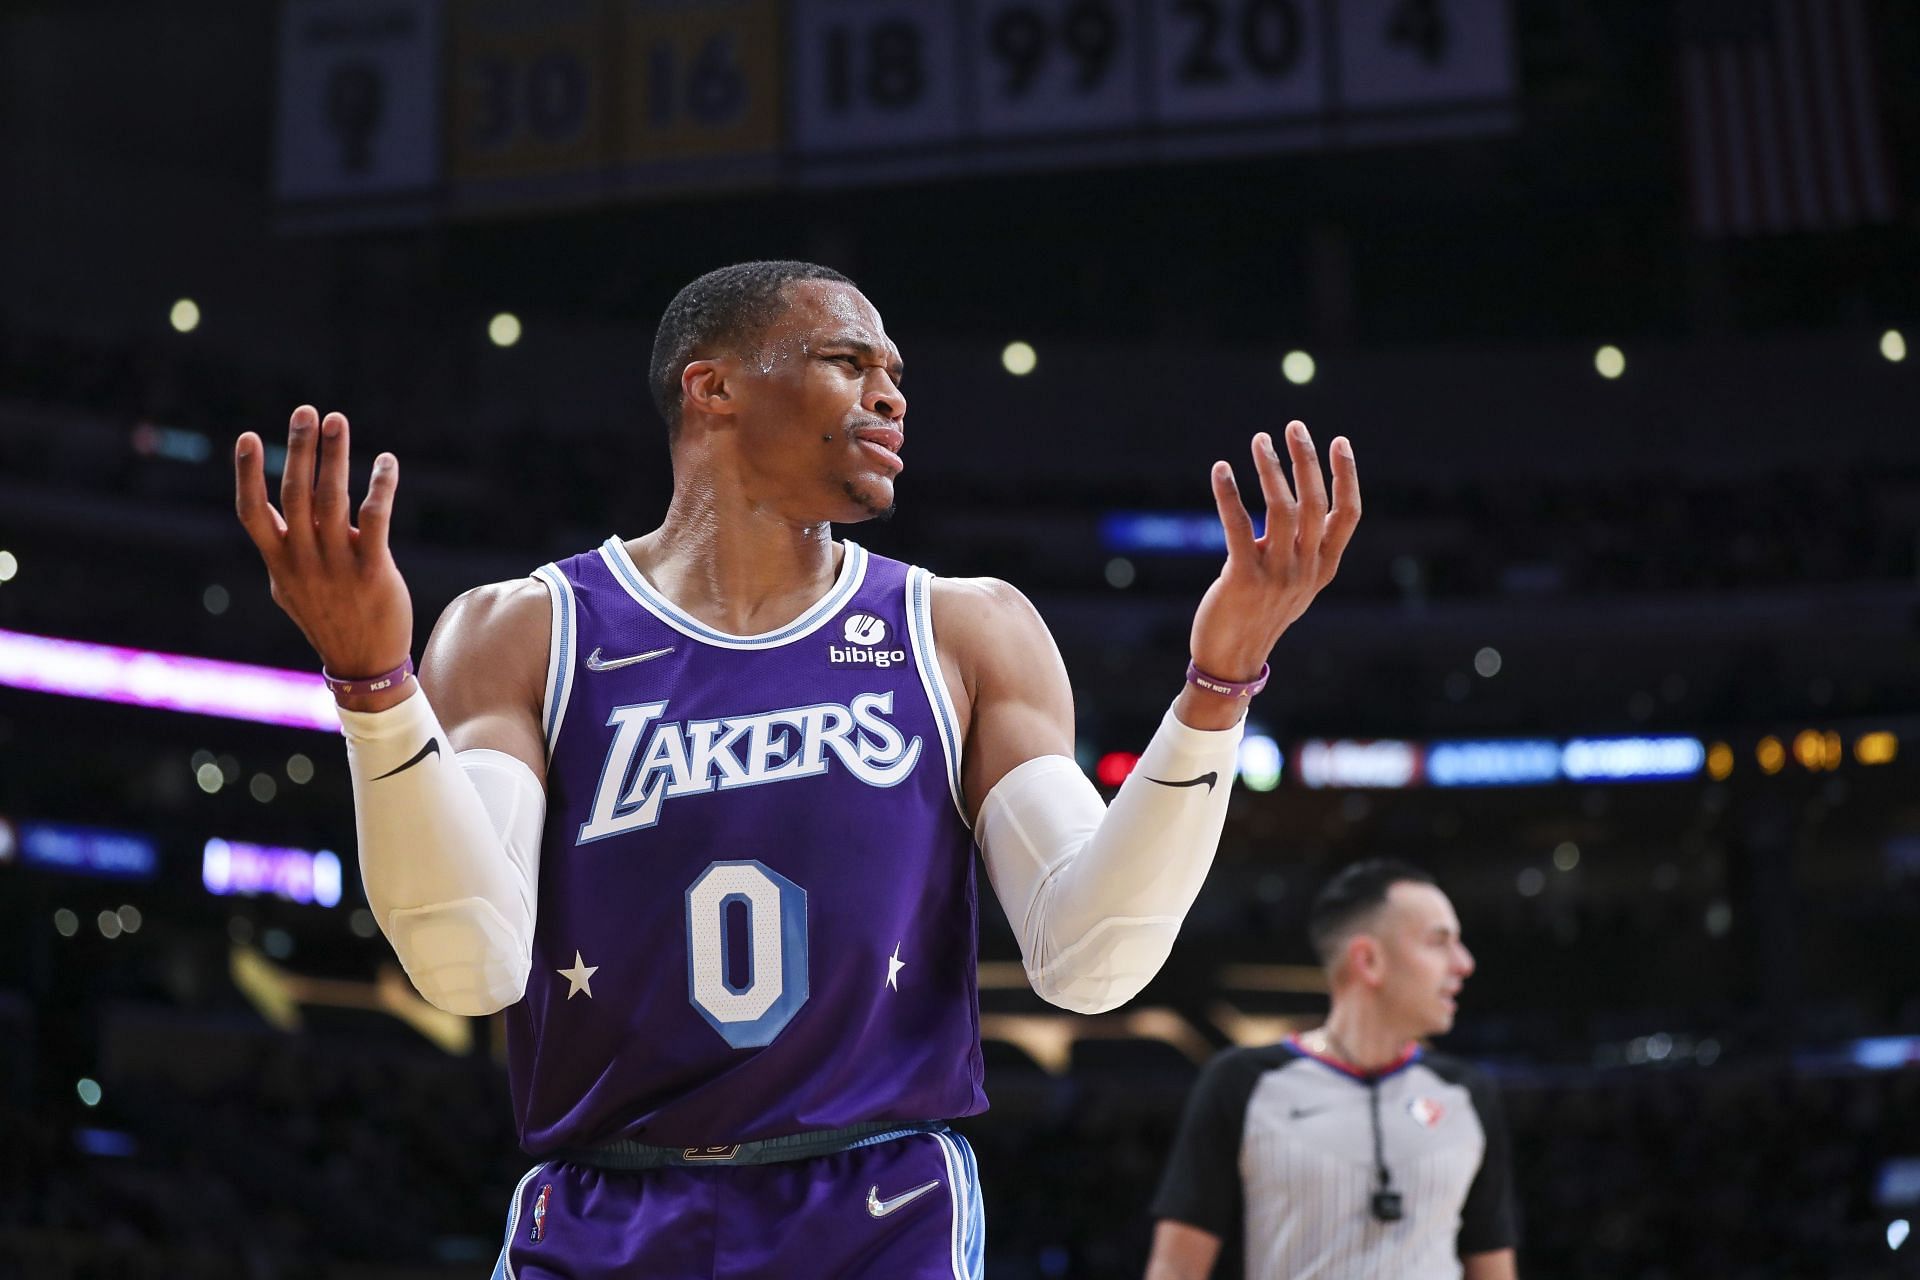 Russell Westbrook of the LA Lakers reacts to a call on Jan. 7 in Los Angeles, California.